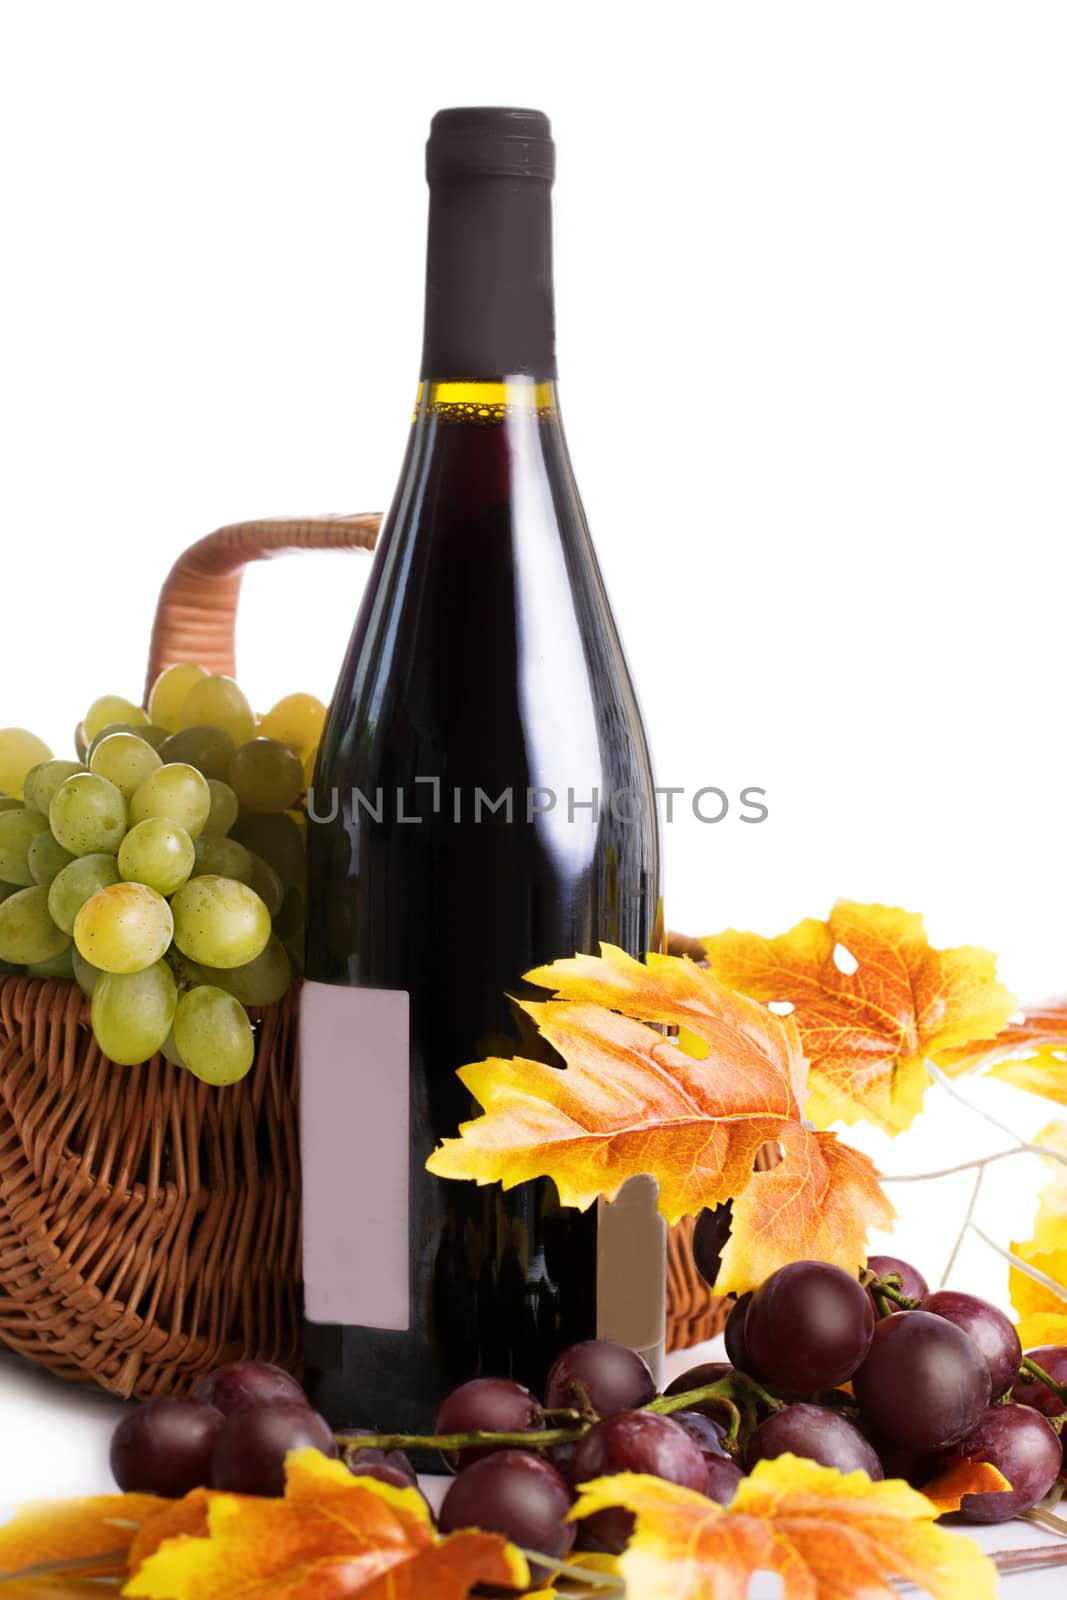 Bottle of wine with grapes in basket by Angel_a